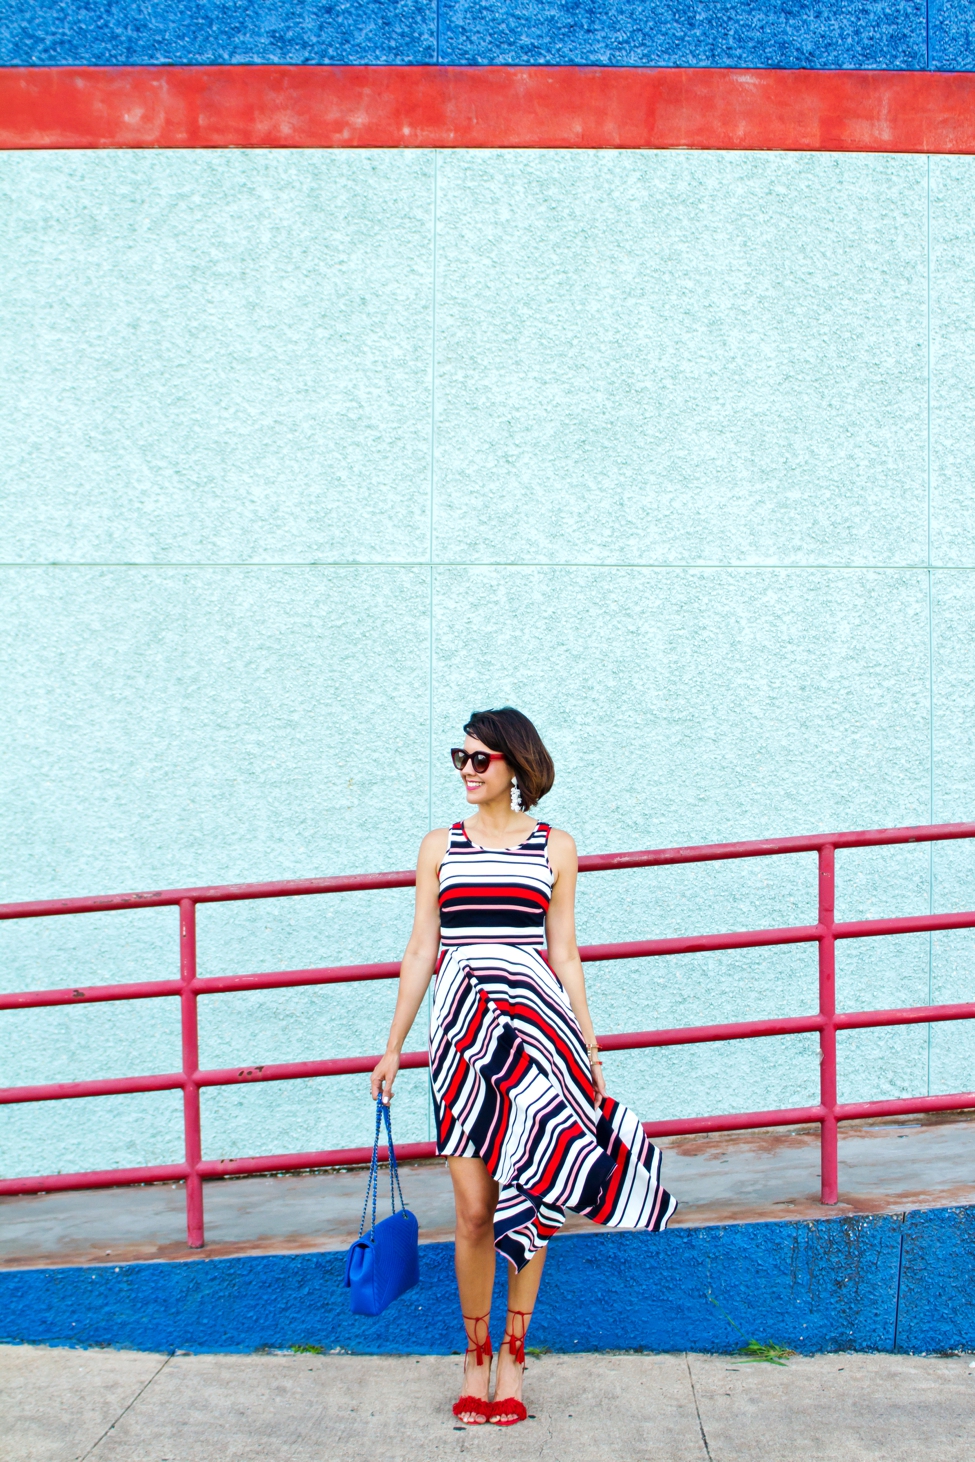 Wear Where Well ModCloth Workwear Red White Blue dress_0015